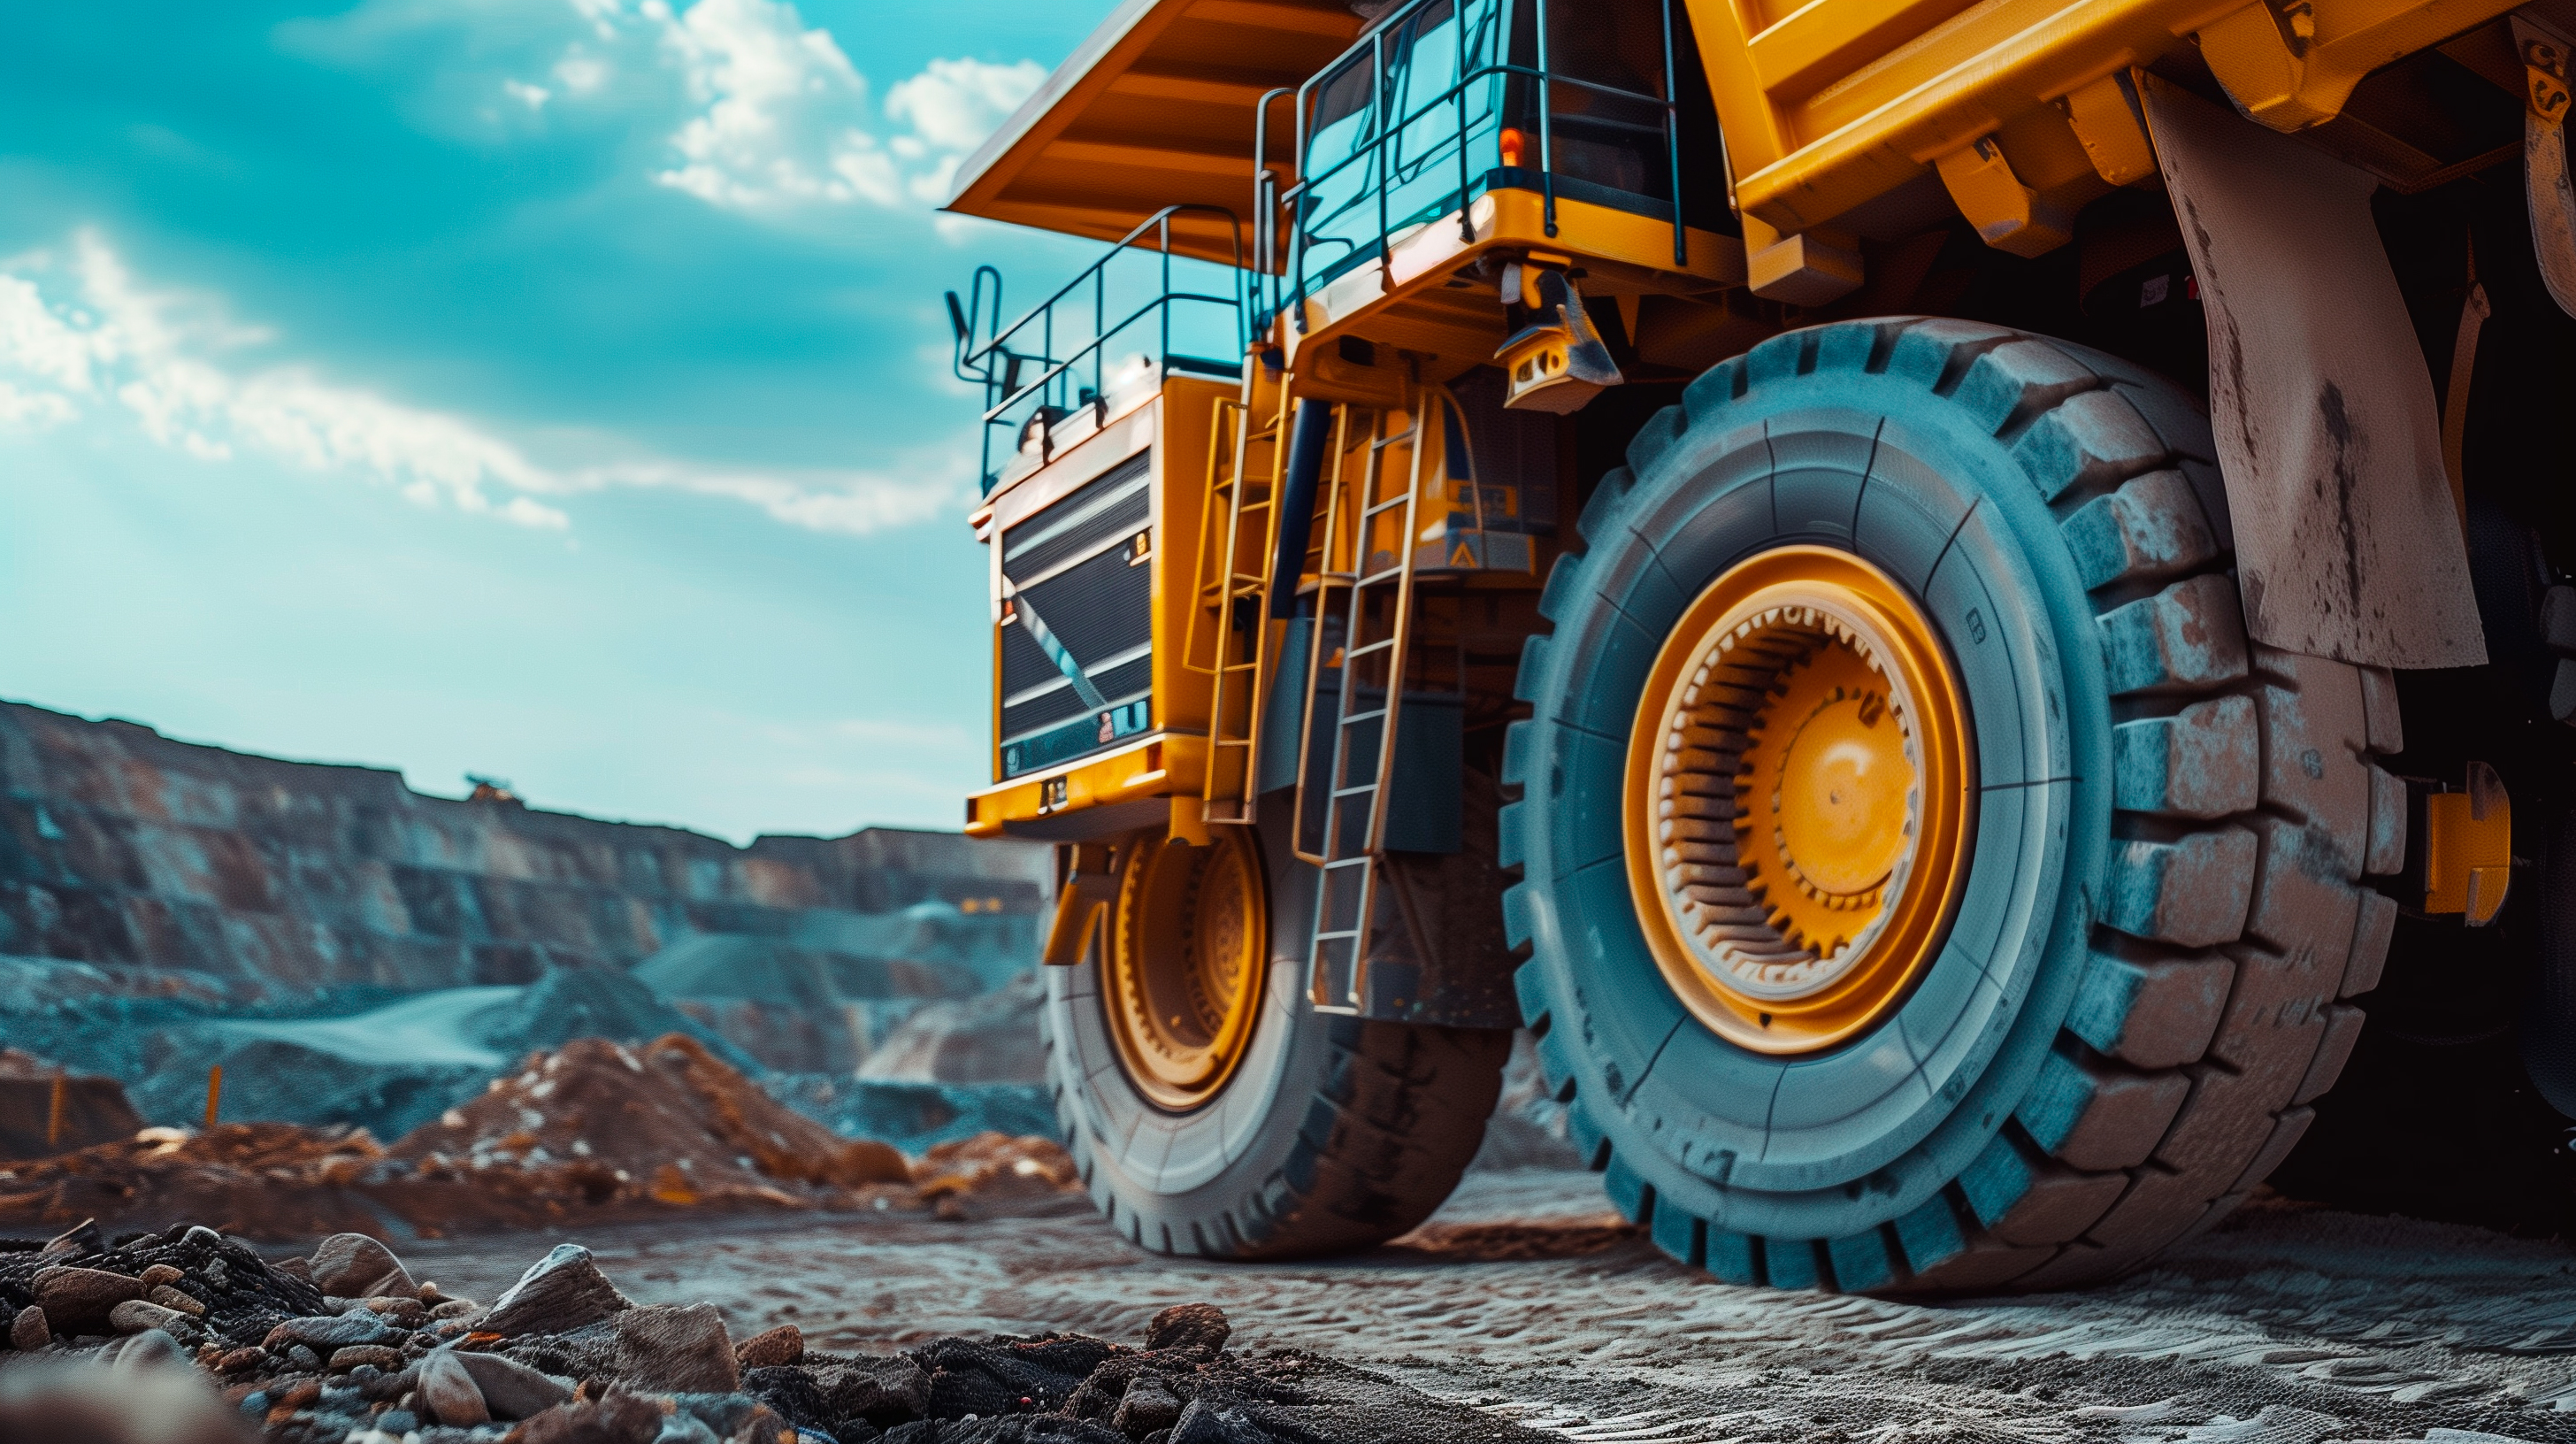 The image shows a closeup scene of a yellow dump truck standing sand pit